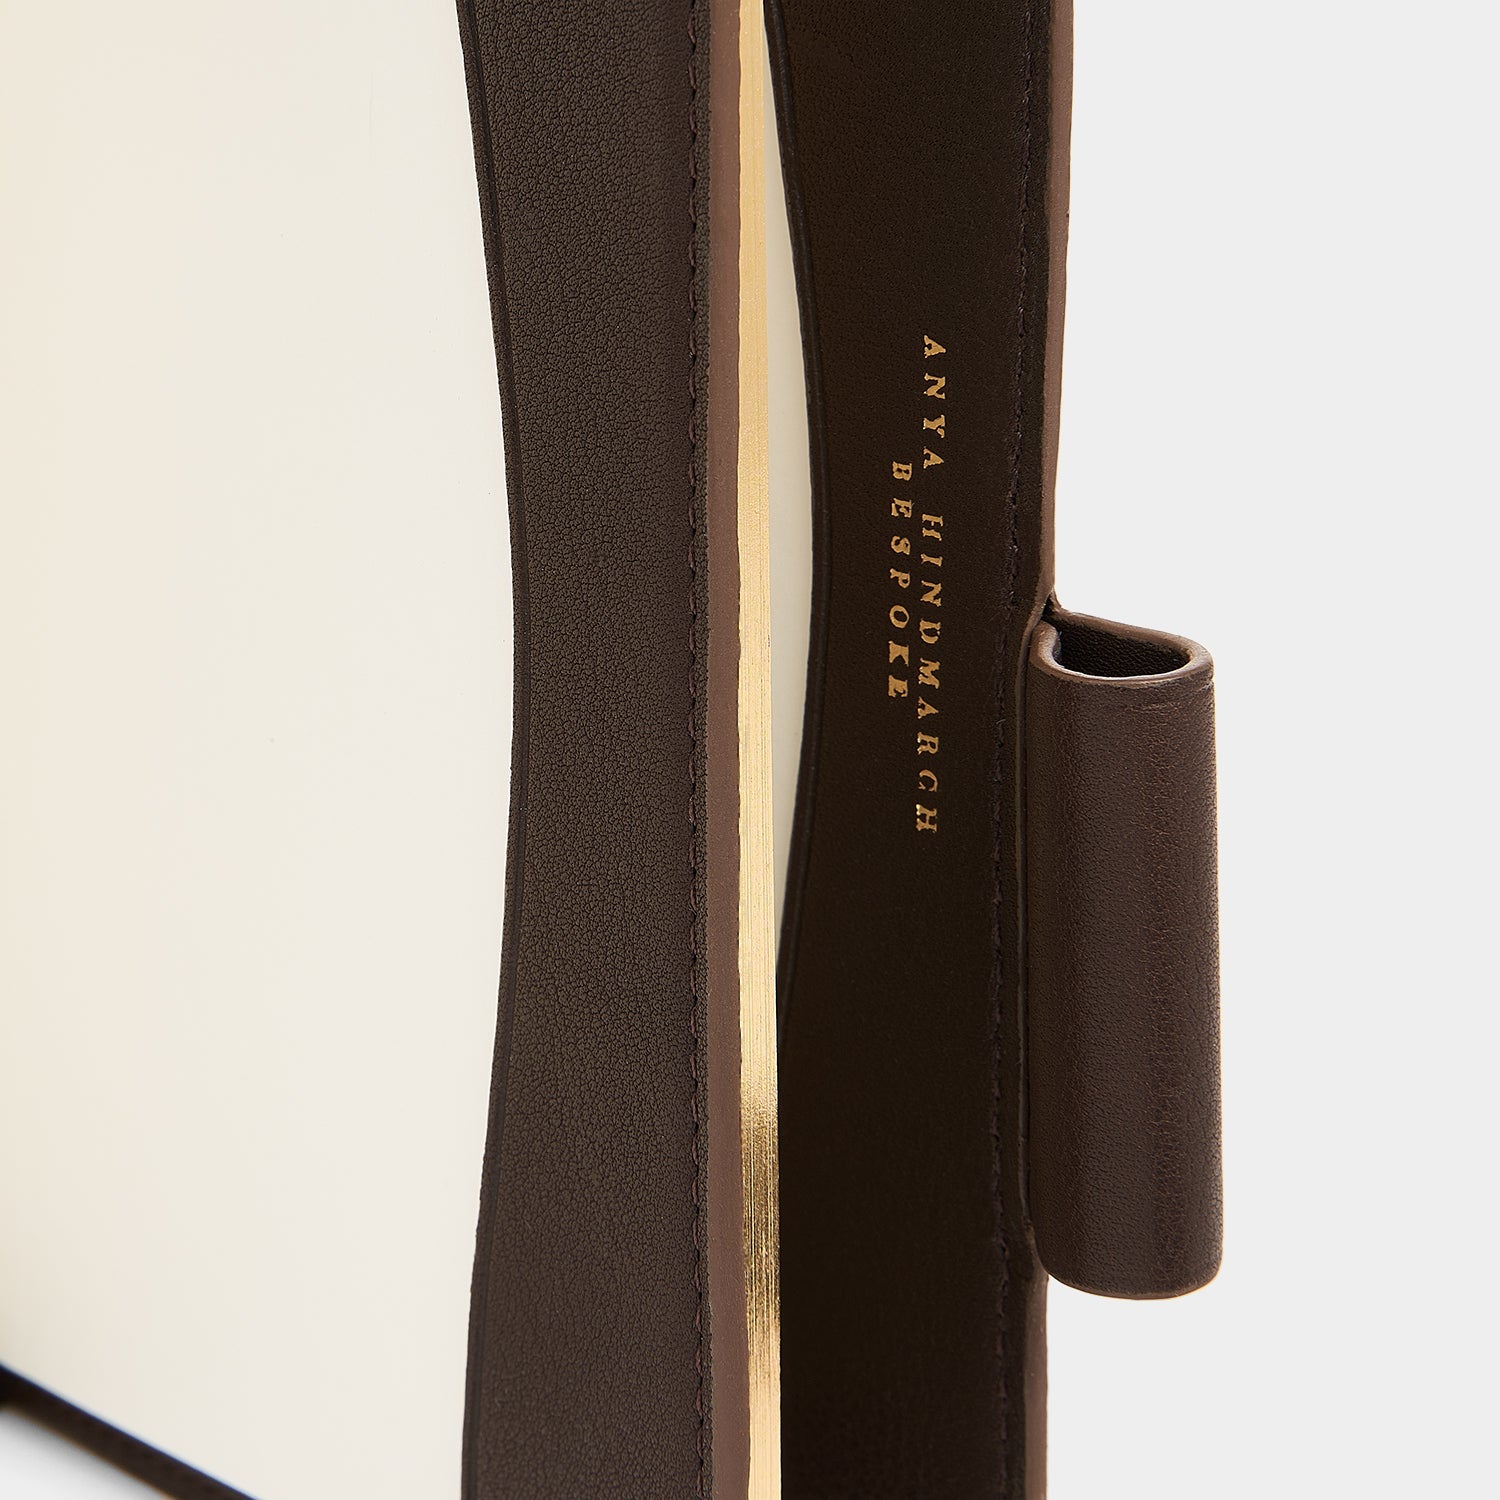 Bespoke A6 Two Way Journal -

                  
                    Butter Leather in Chocolate -
                  

                  Anya Hindmarch EU
